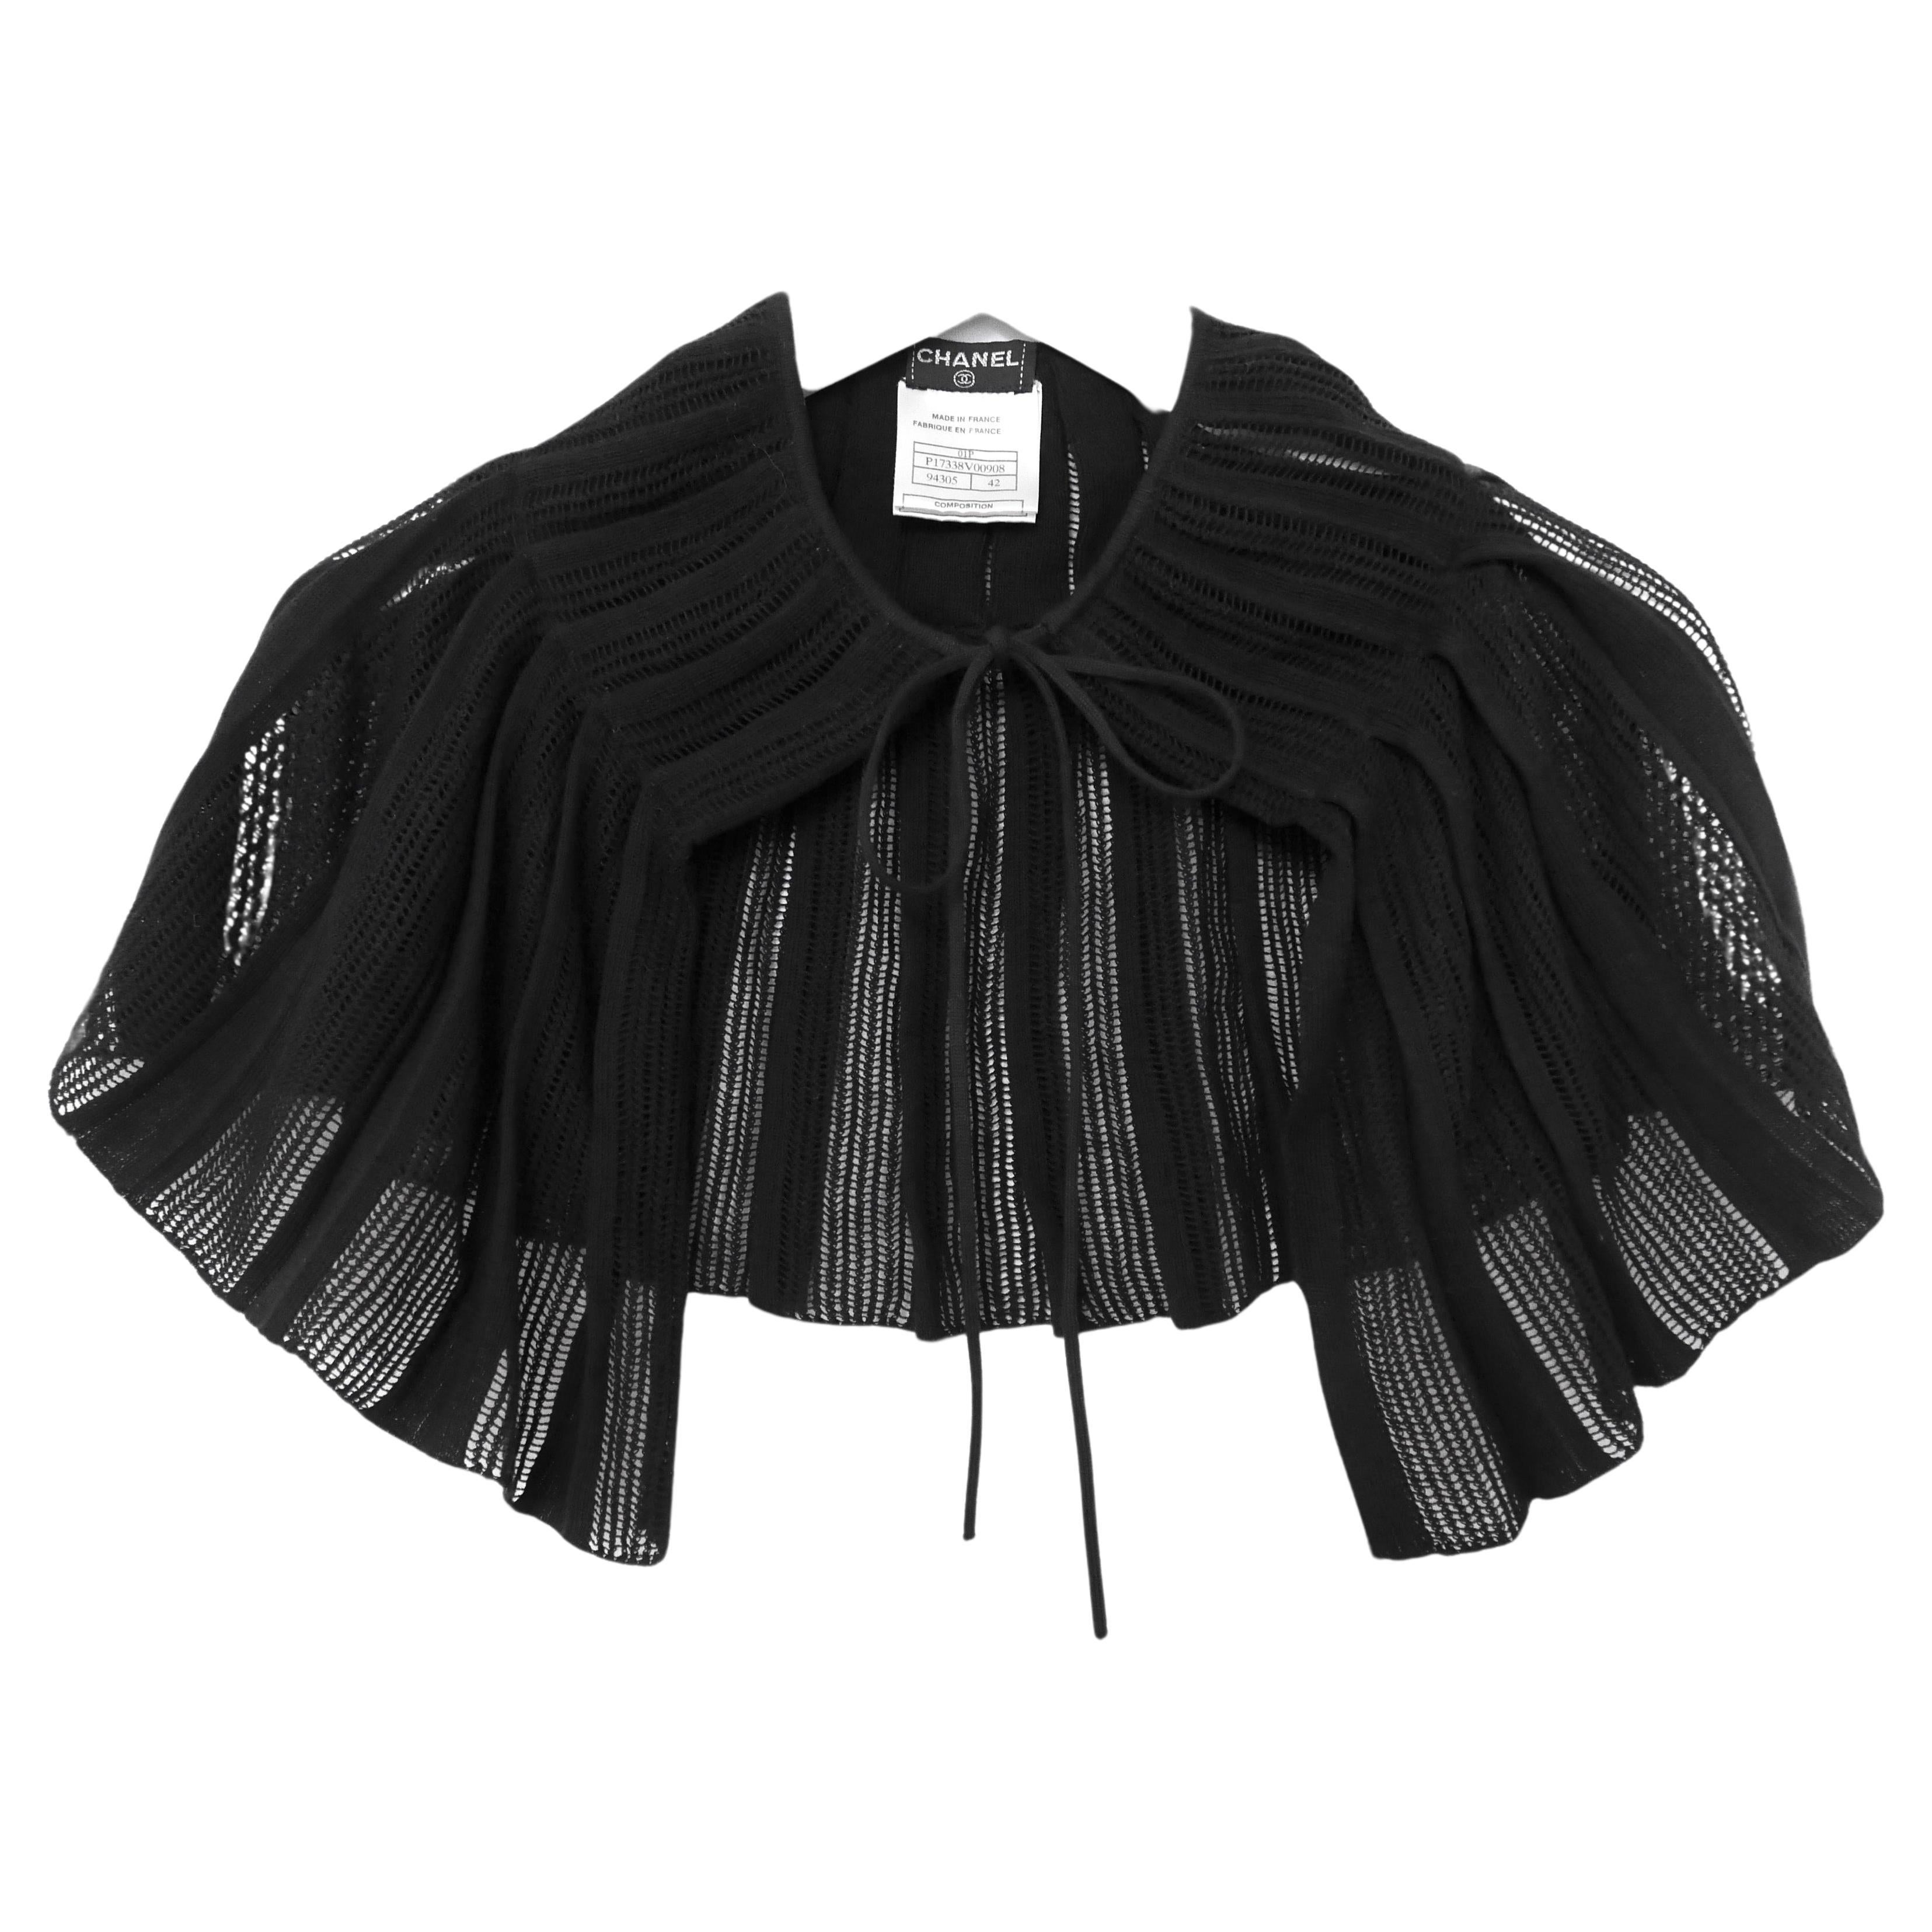 Chanel SS12 Black Zipper Detail Perforated Jacket For Sale